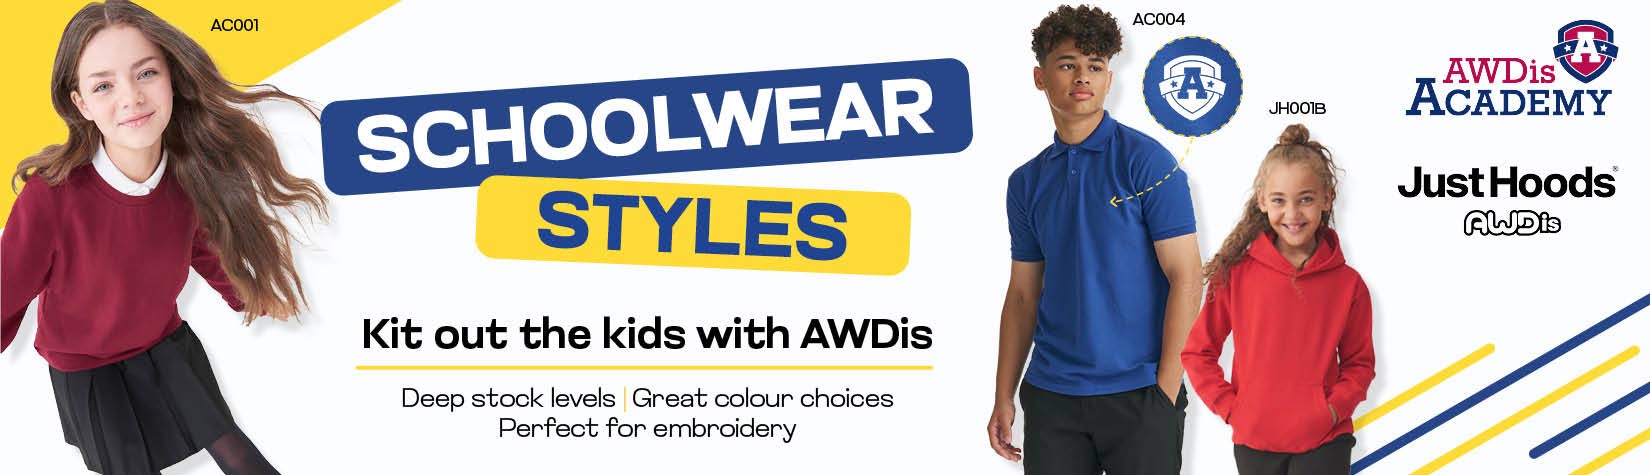 Schoolwear styles from AWDis!